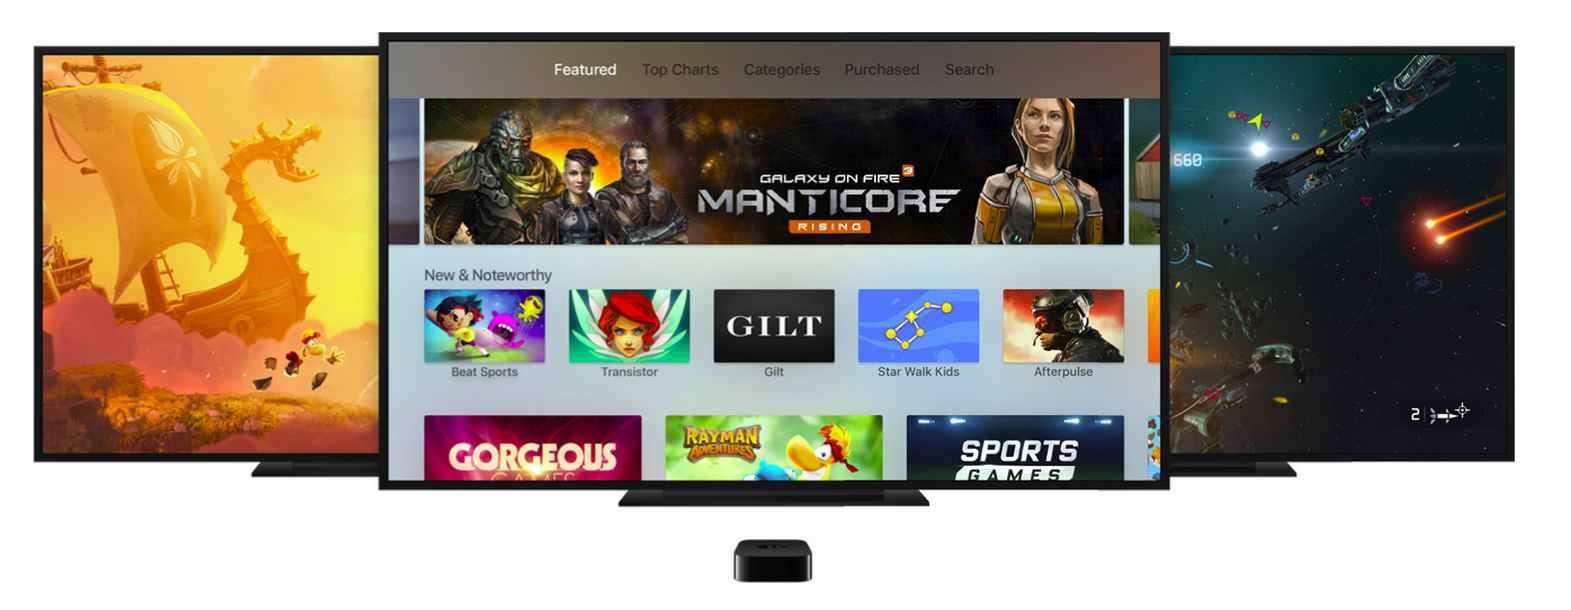 Apple TV, now with gaming integration! You can you your iPhone, iPod, or iPad to control